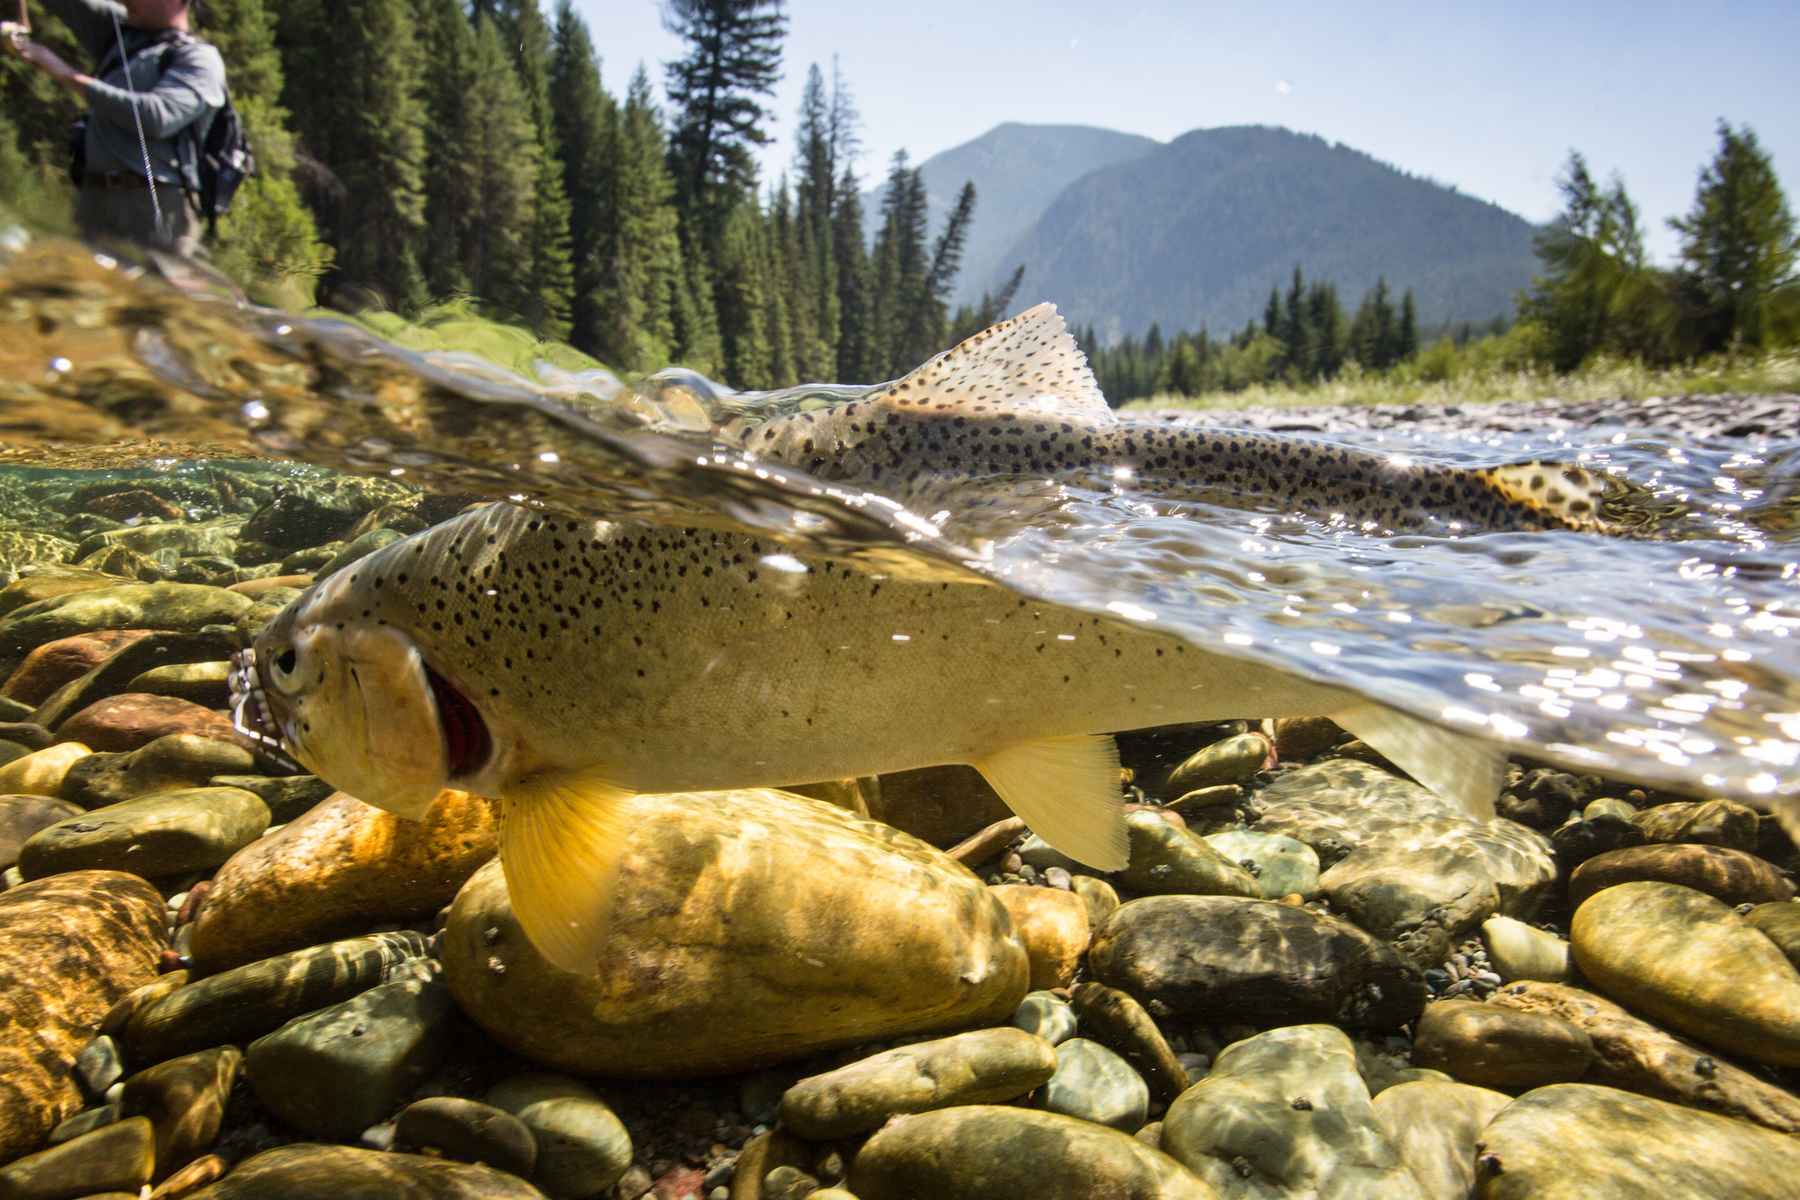 Targeting trophy trout in small water